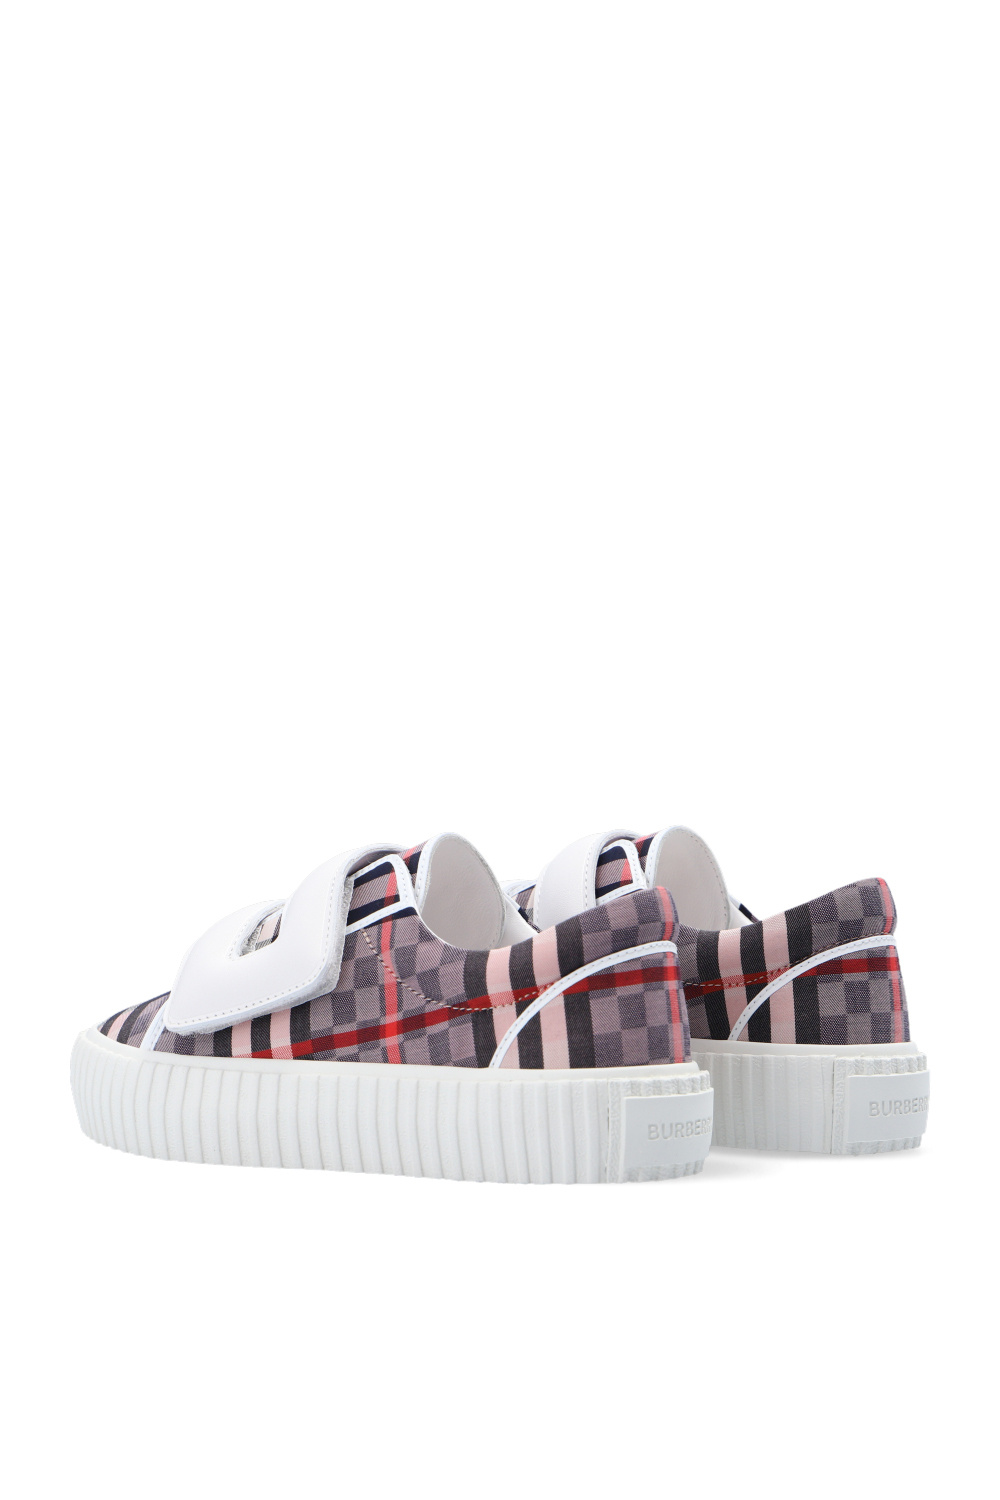 burberry archive Kids Checked sneakers